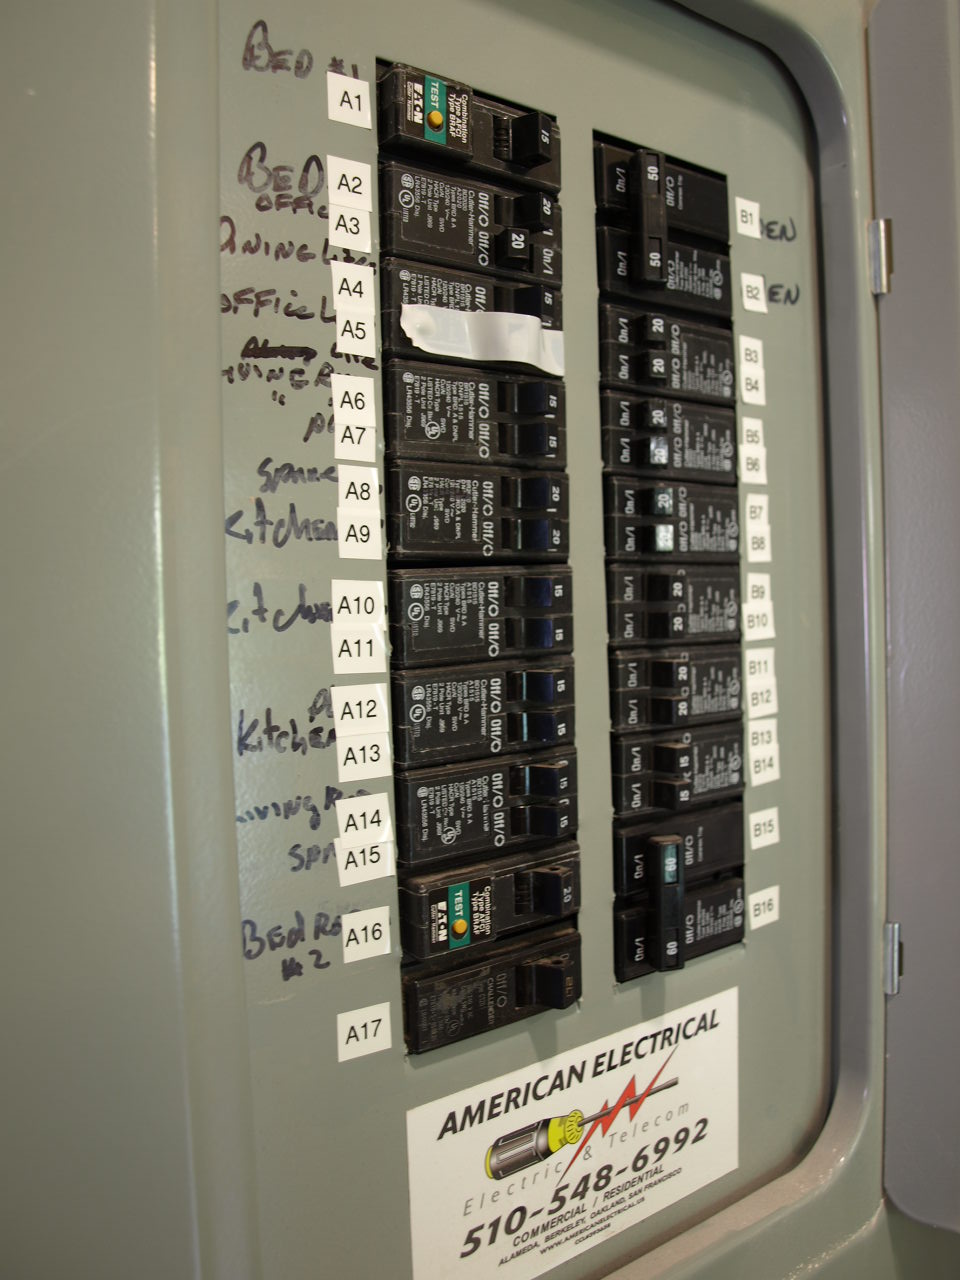 Labeling the Electrical Panel